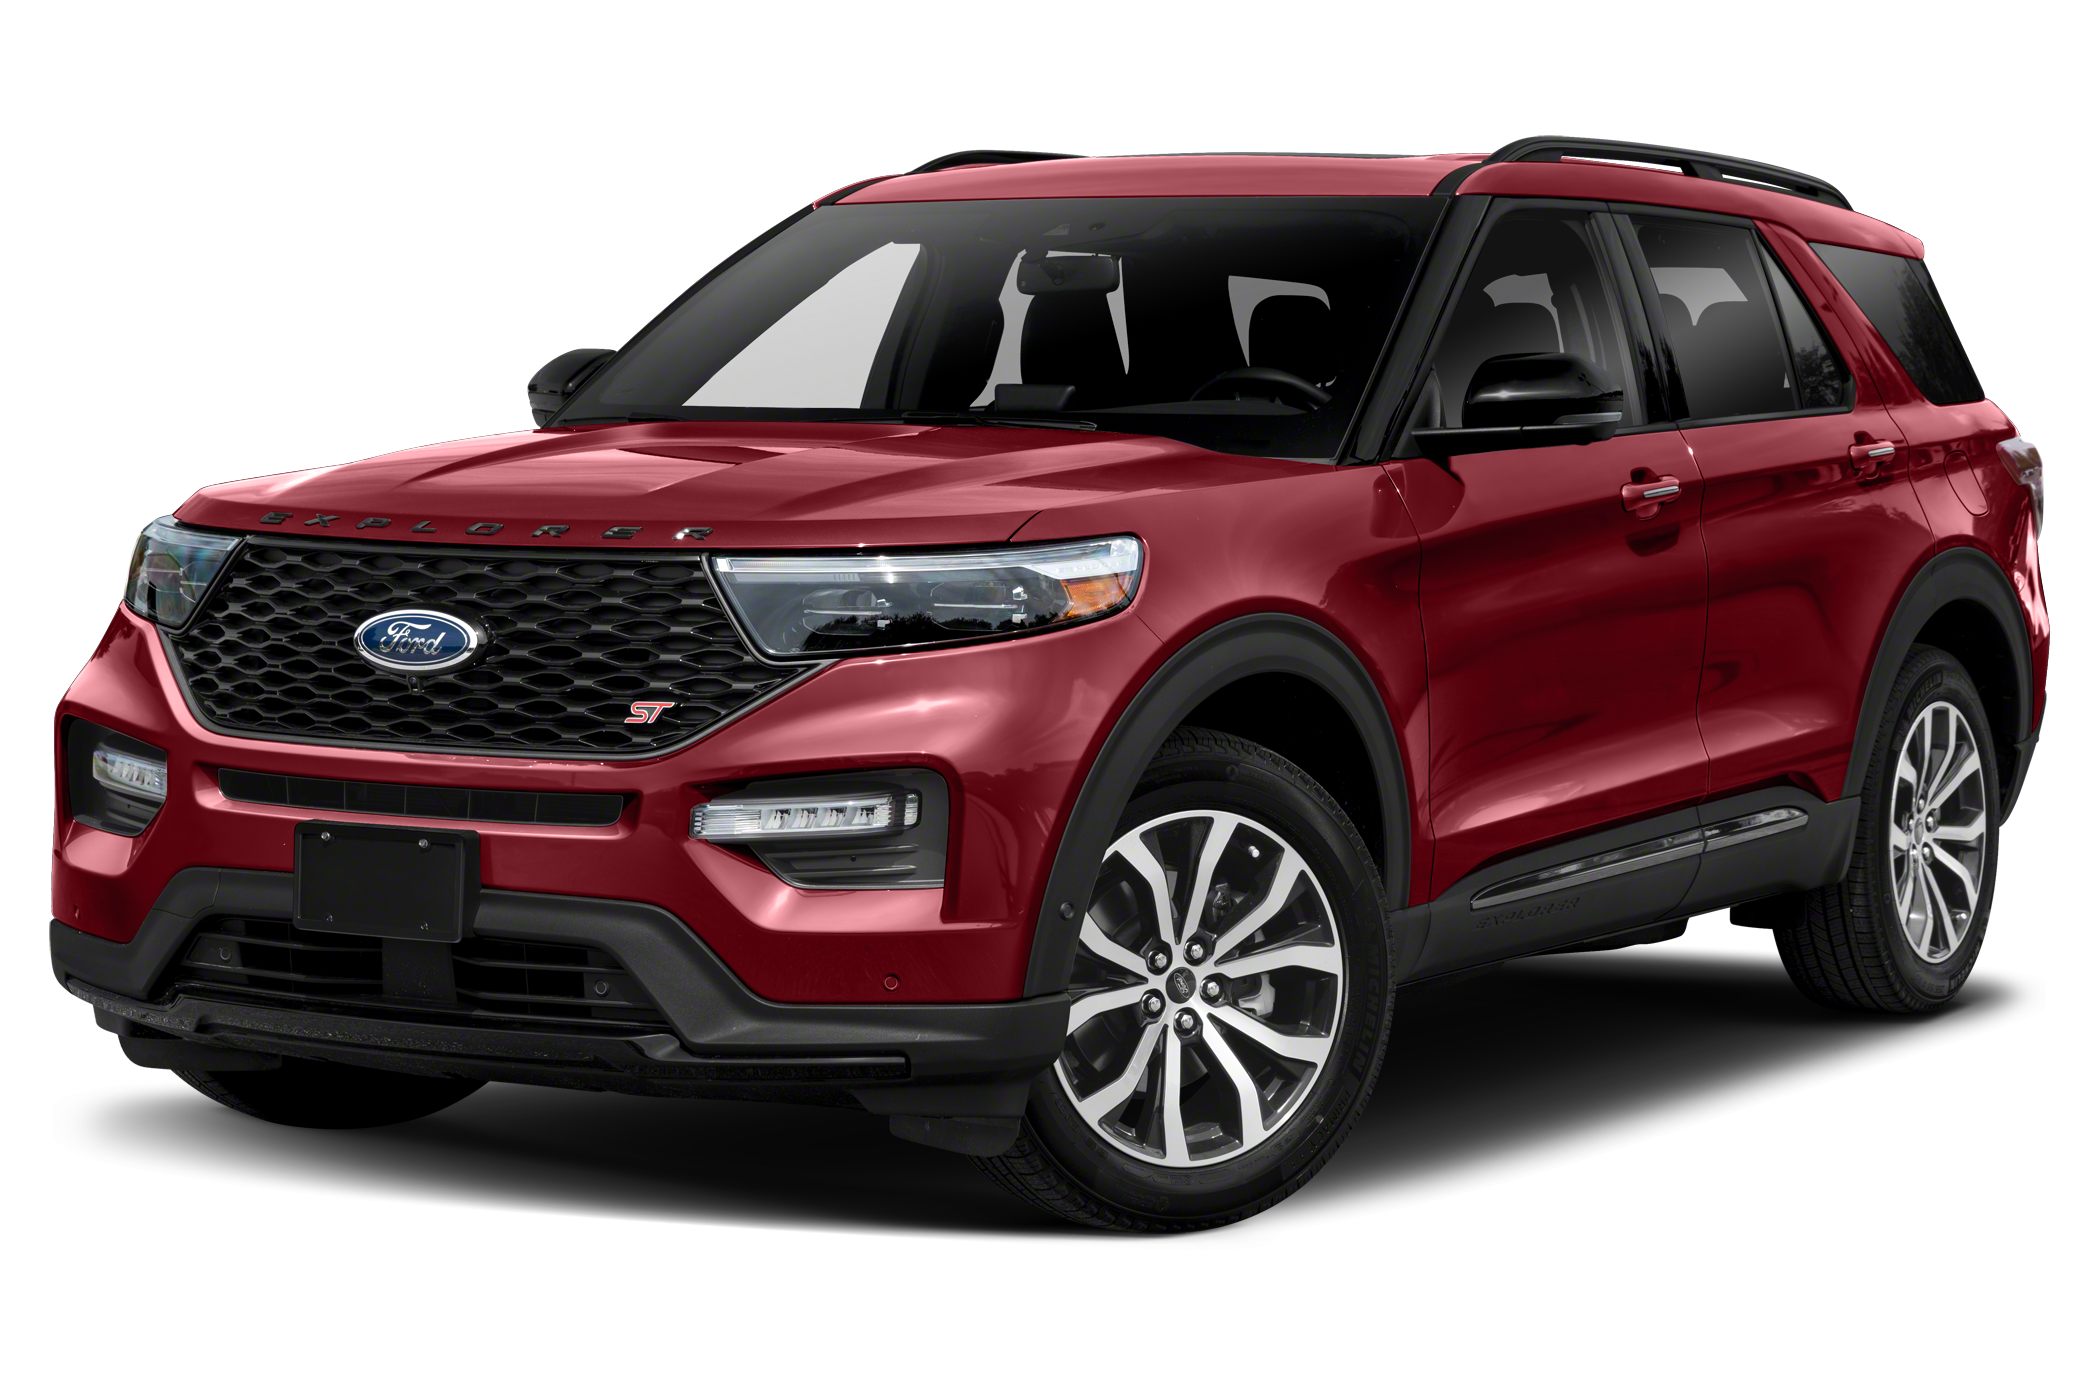 2020 Ford Explorer St 4dr 4x4 Pictures